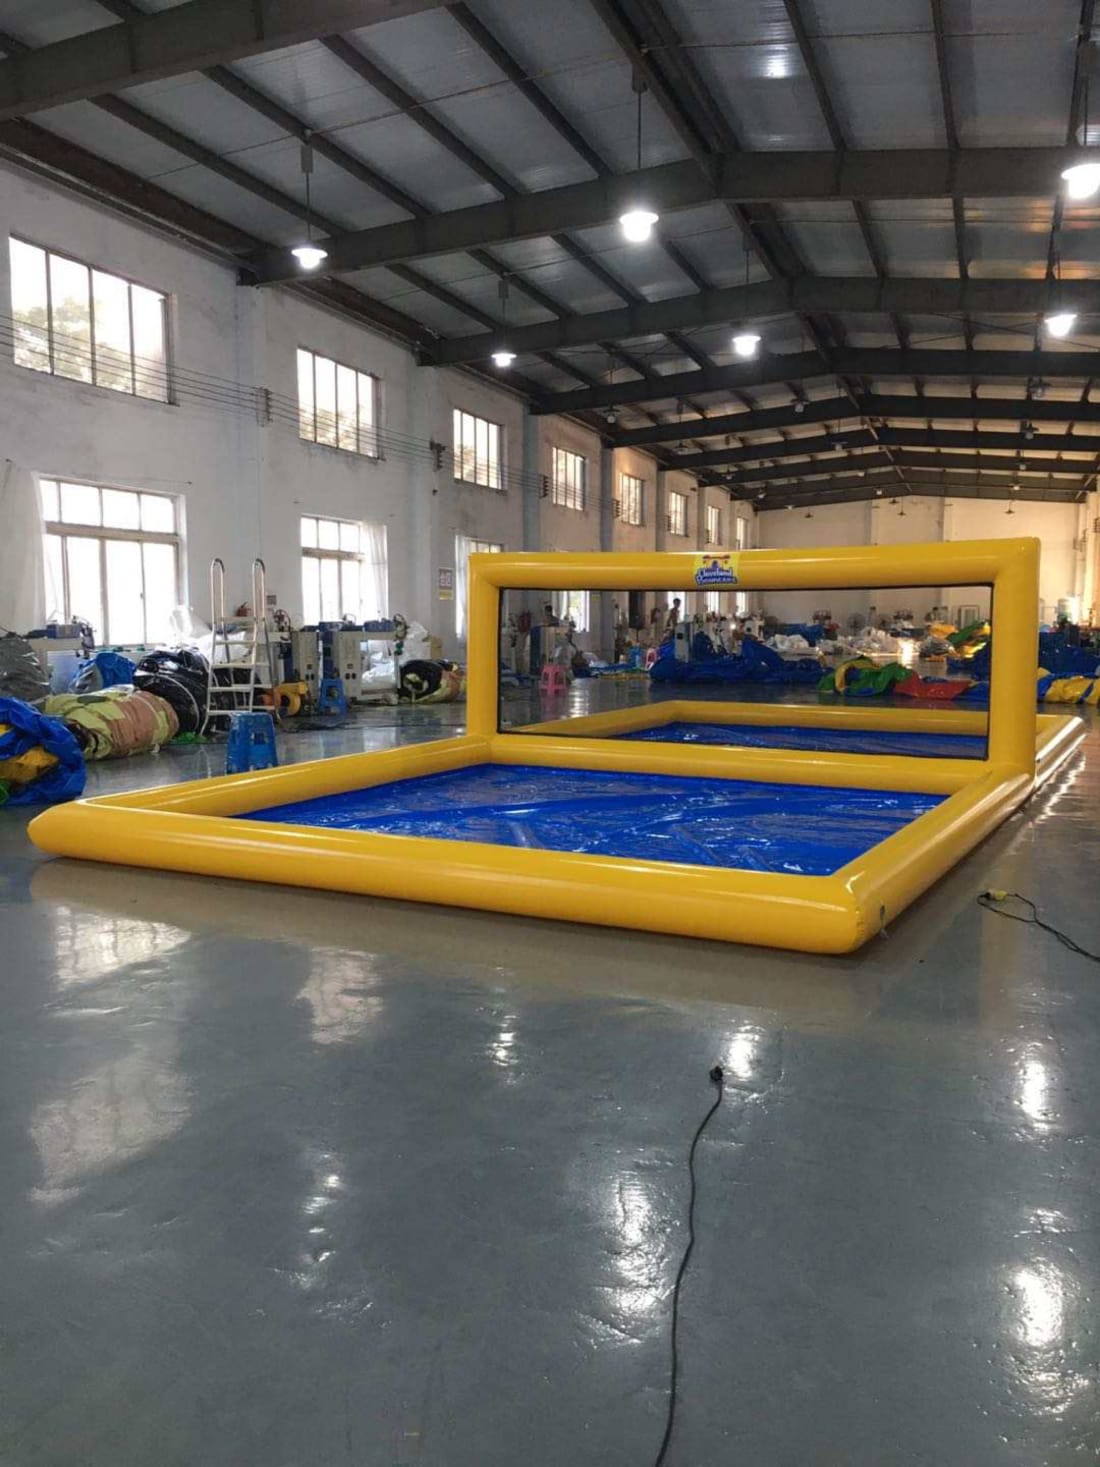 Inflatable Volleyball Court with Trampoline